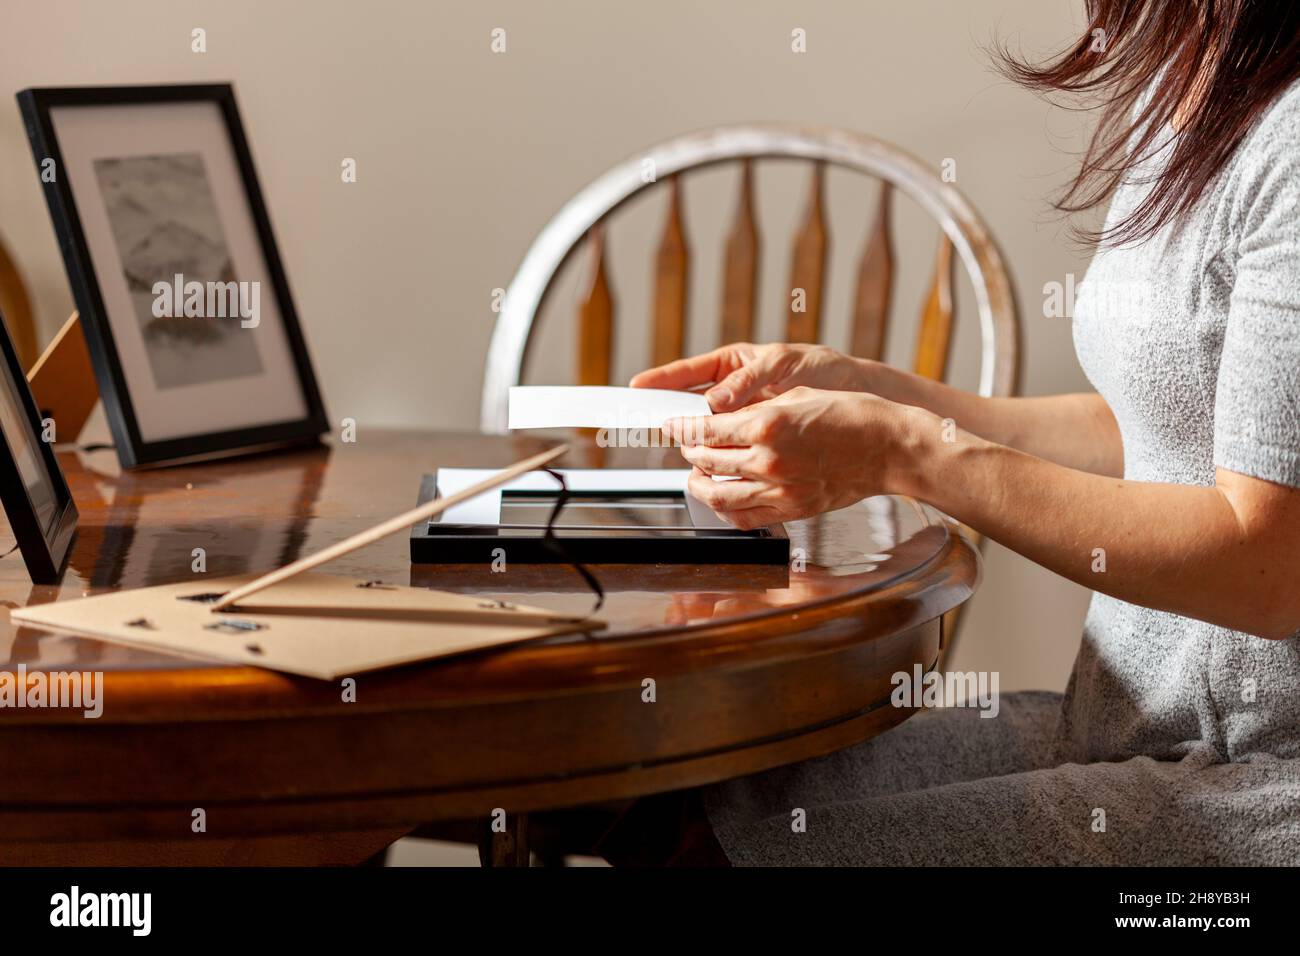 A young caucasian woman is placing a printed photograph into a picture frame with kickstand. There are other frames on the table. Tabletop picture fra Stock Photo